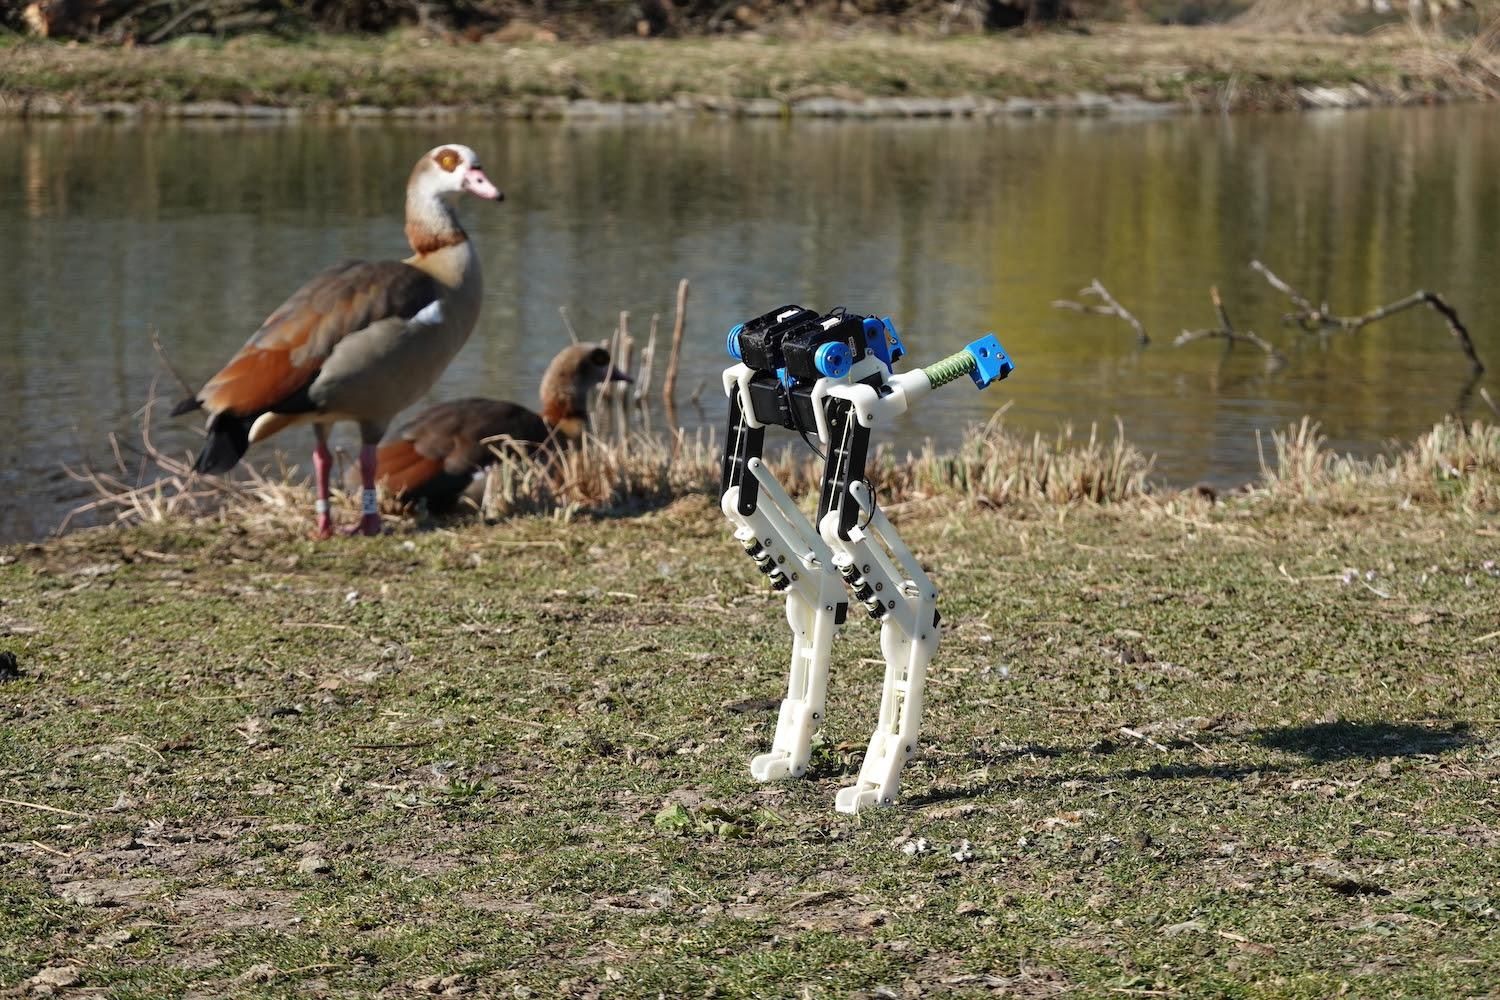 Robotic bird legs stand in a grassy field with two ducks and a lake in the background